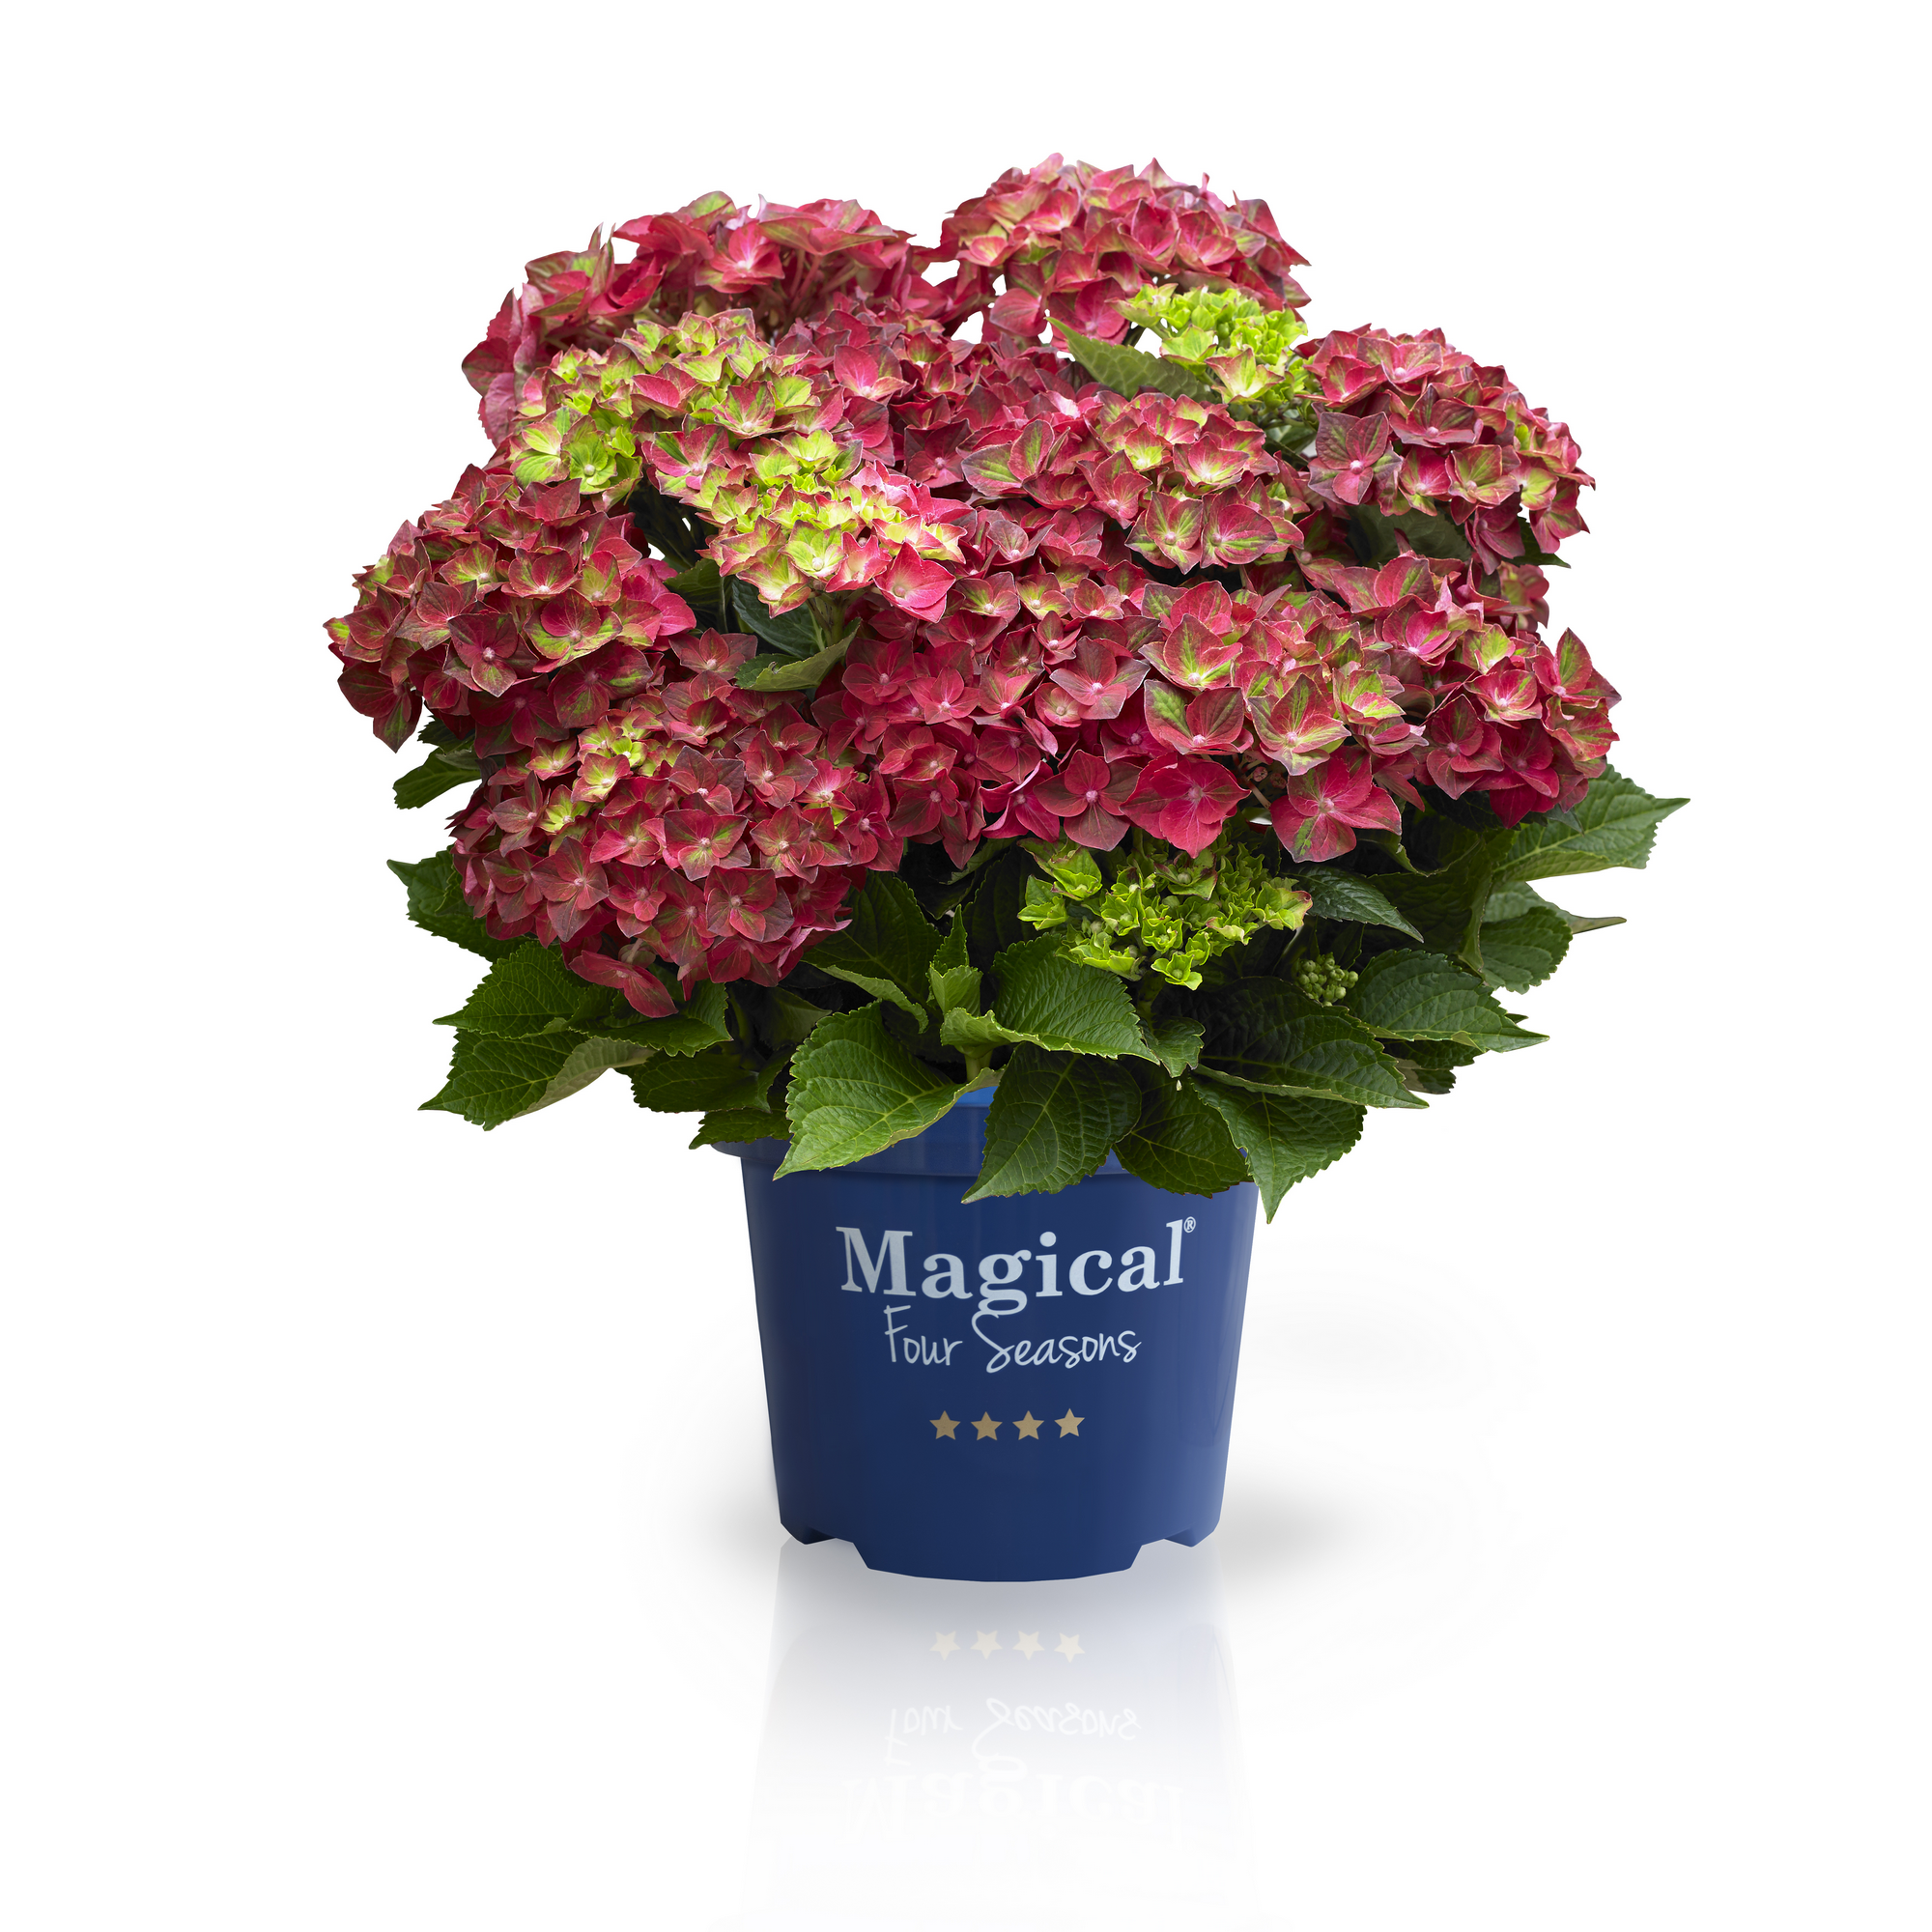 Hortensie 'Magical Ruby Tuesday®', Topf Ø 23 cm + product picture